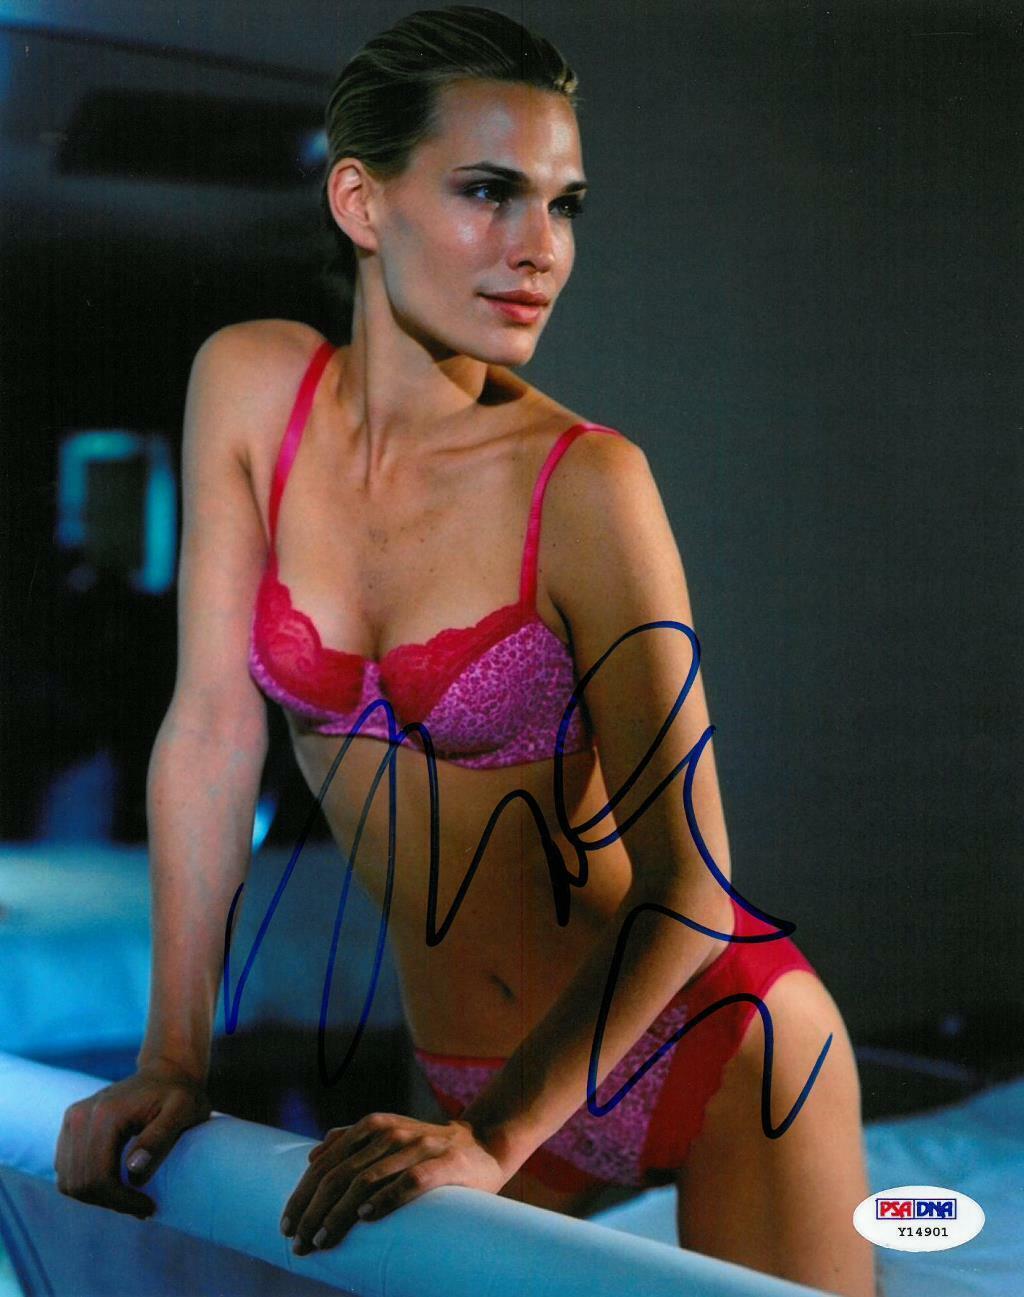 Molly Sims Signed Sexy Authentic Autographed 8x10 Photo Poster painting PSA/DNA #Y14901